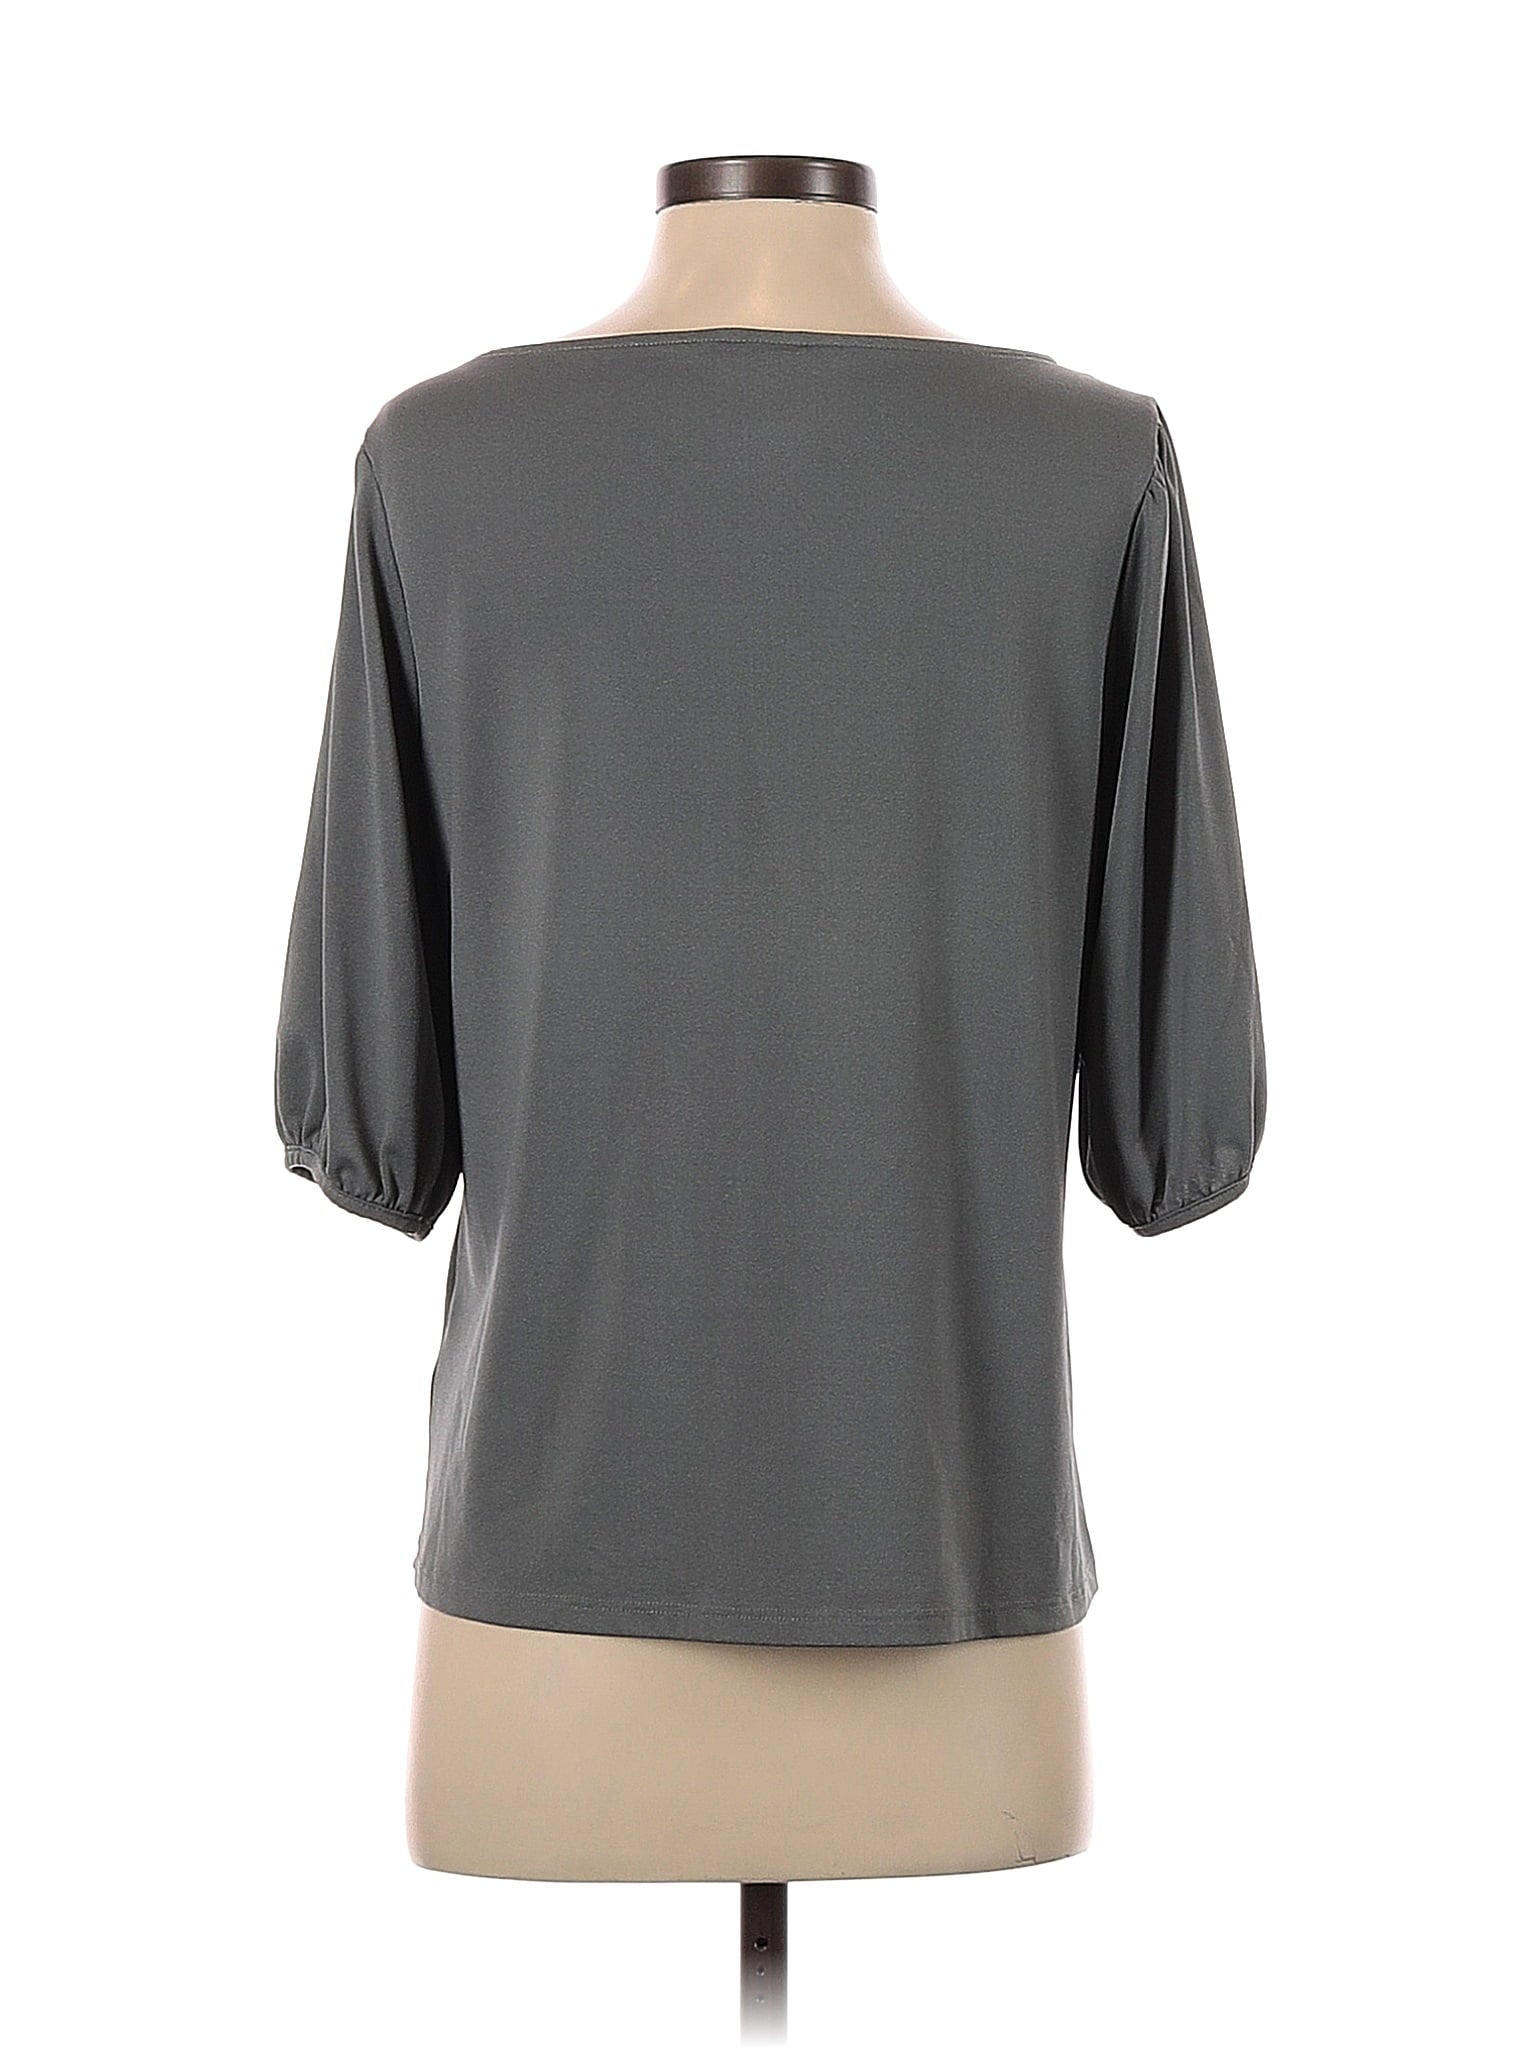 Long Sleeve Top size - S